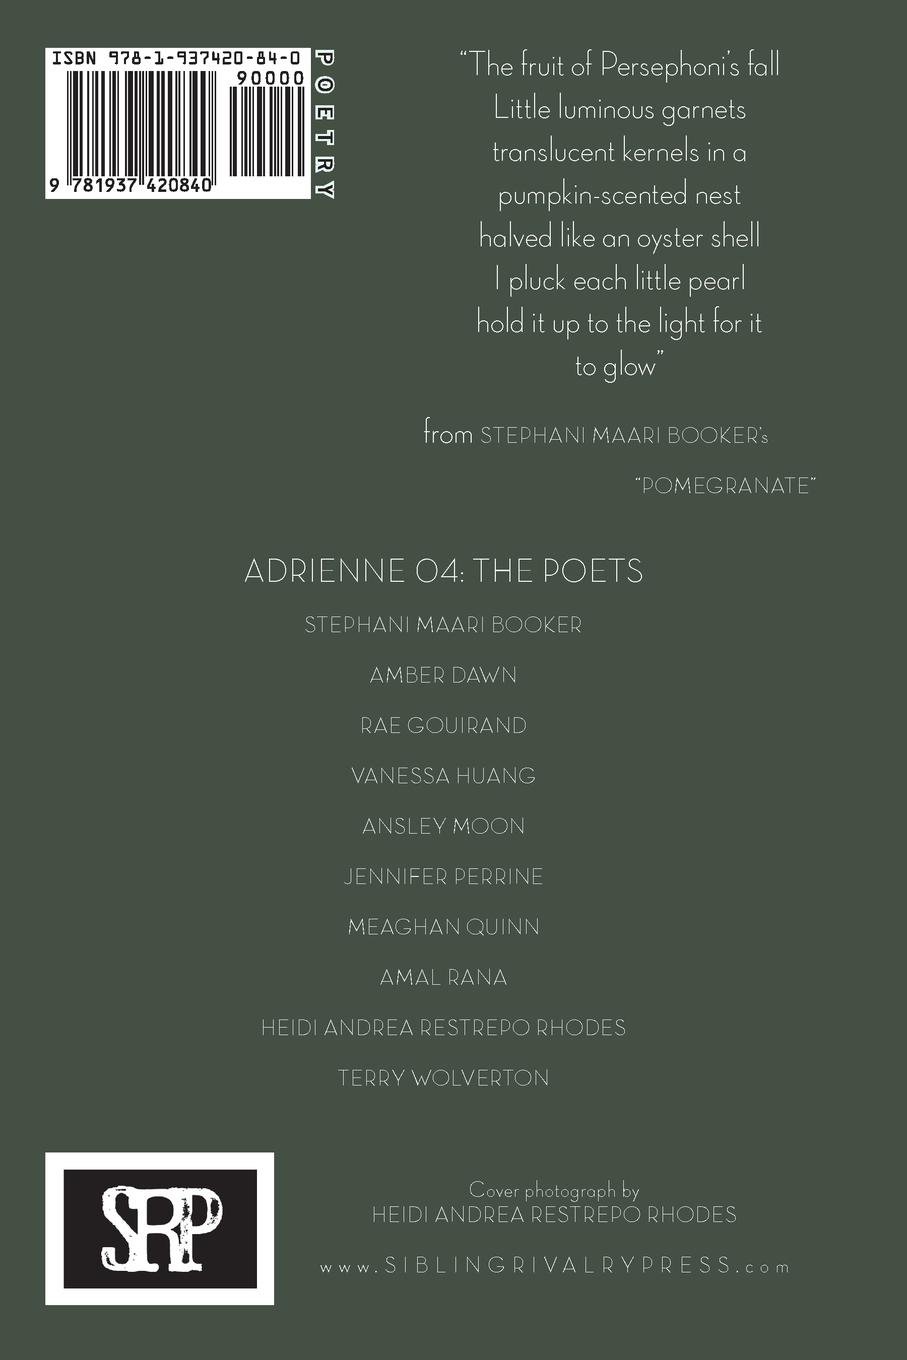 Image of Adrienne Issue 04: A Poetry Journal of Queer Women